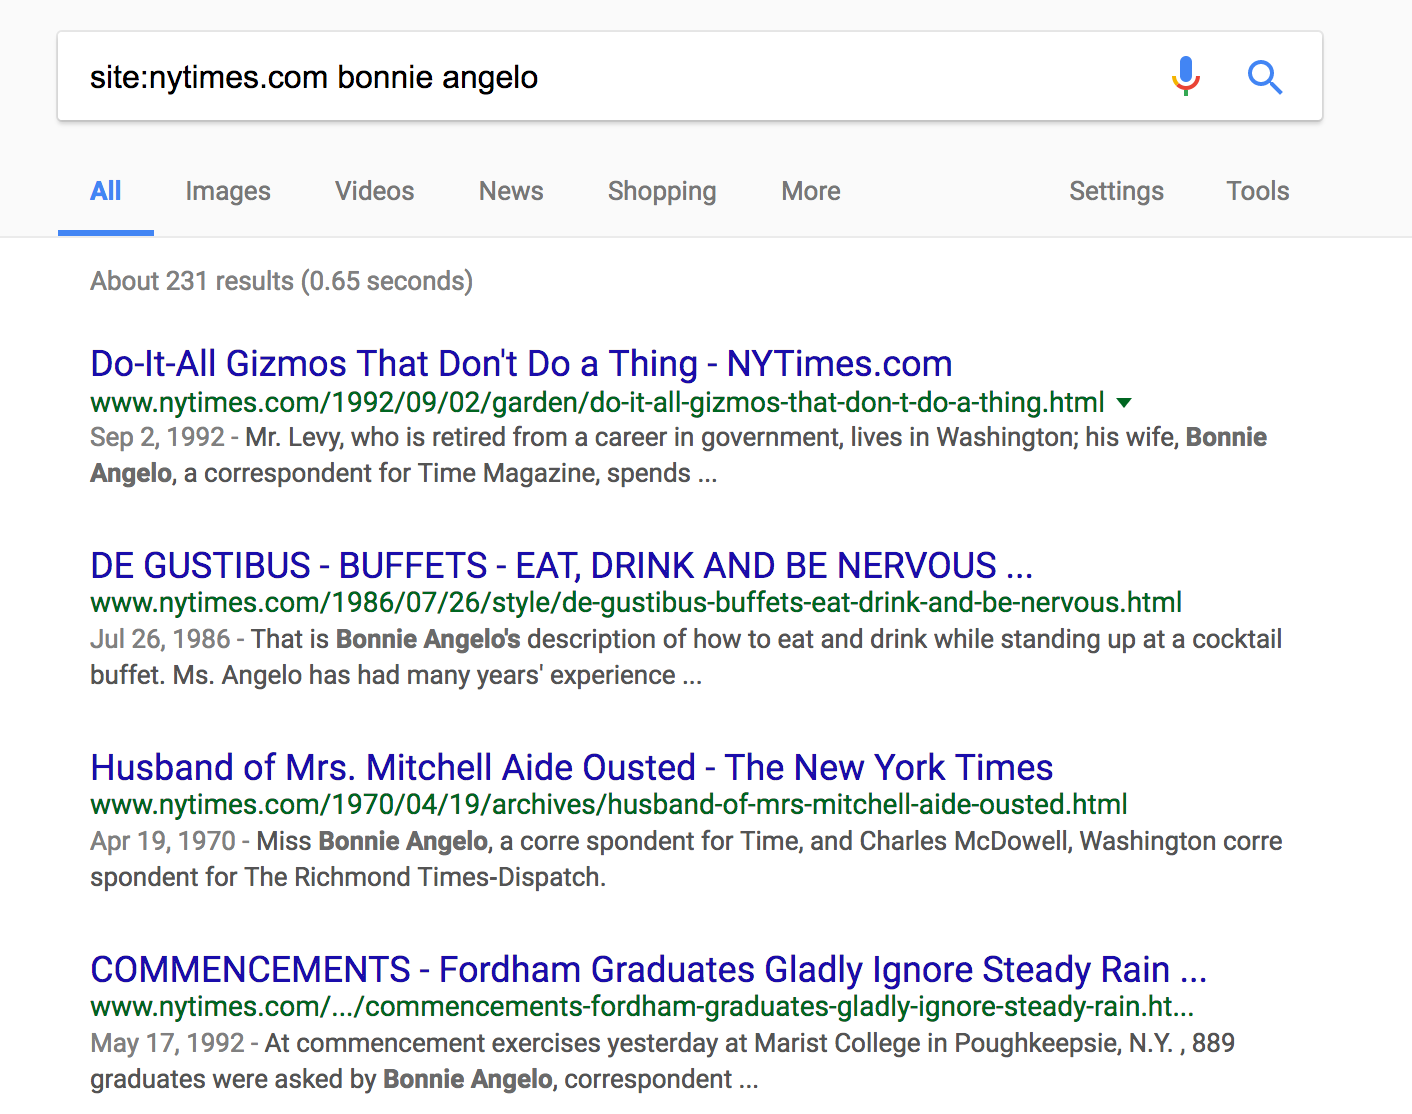 ../../_images/nytimes-bonnie-angelo-google.png